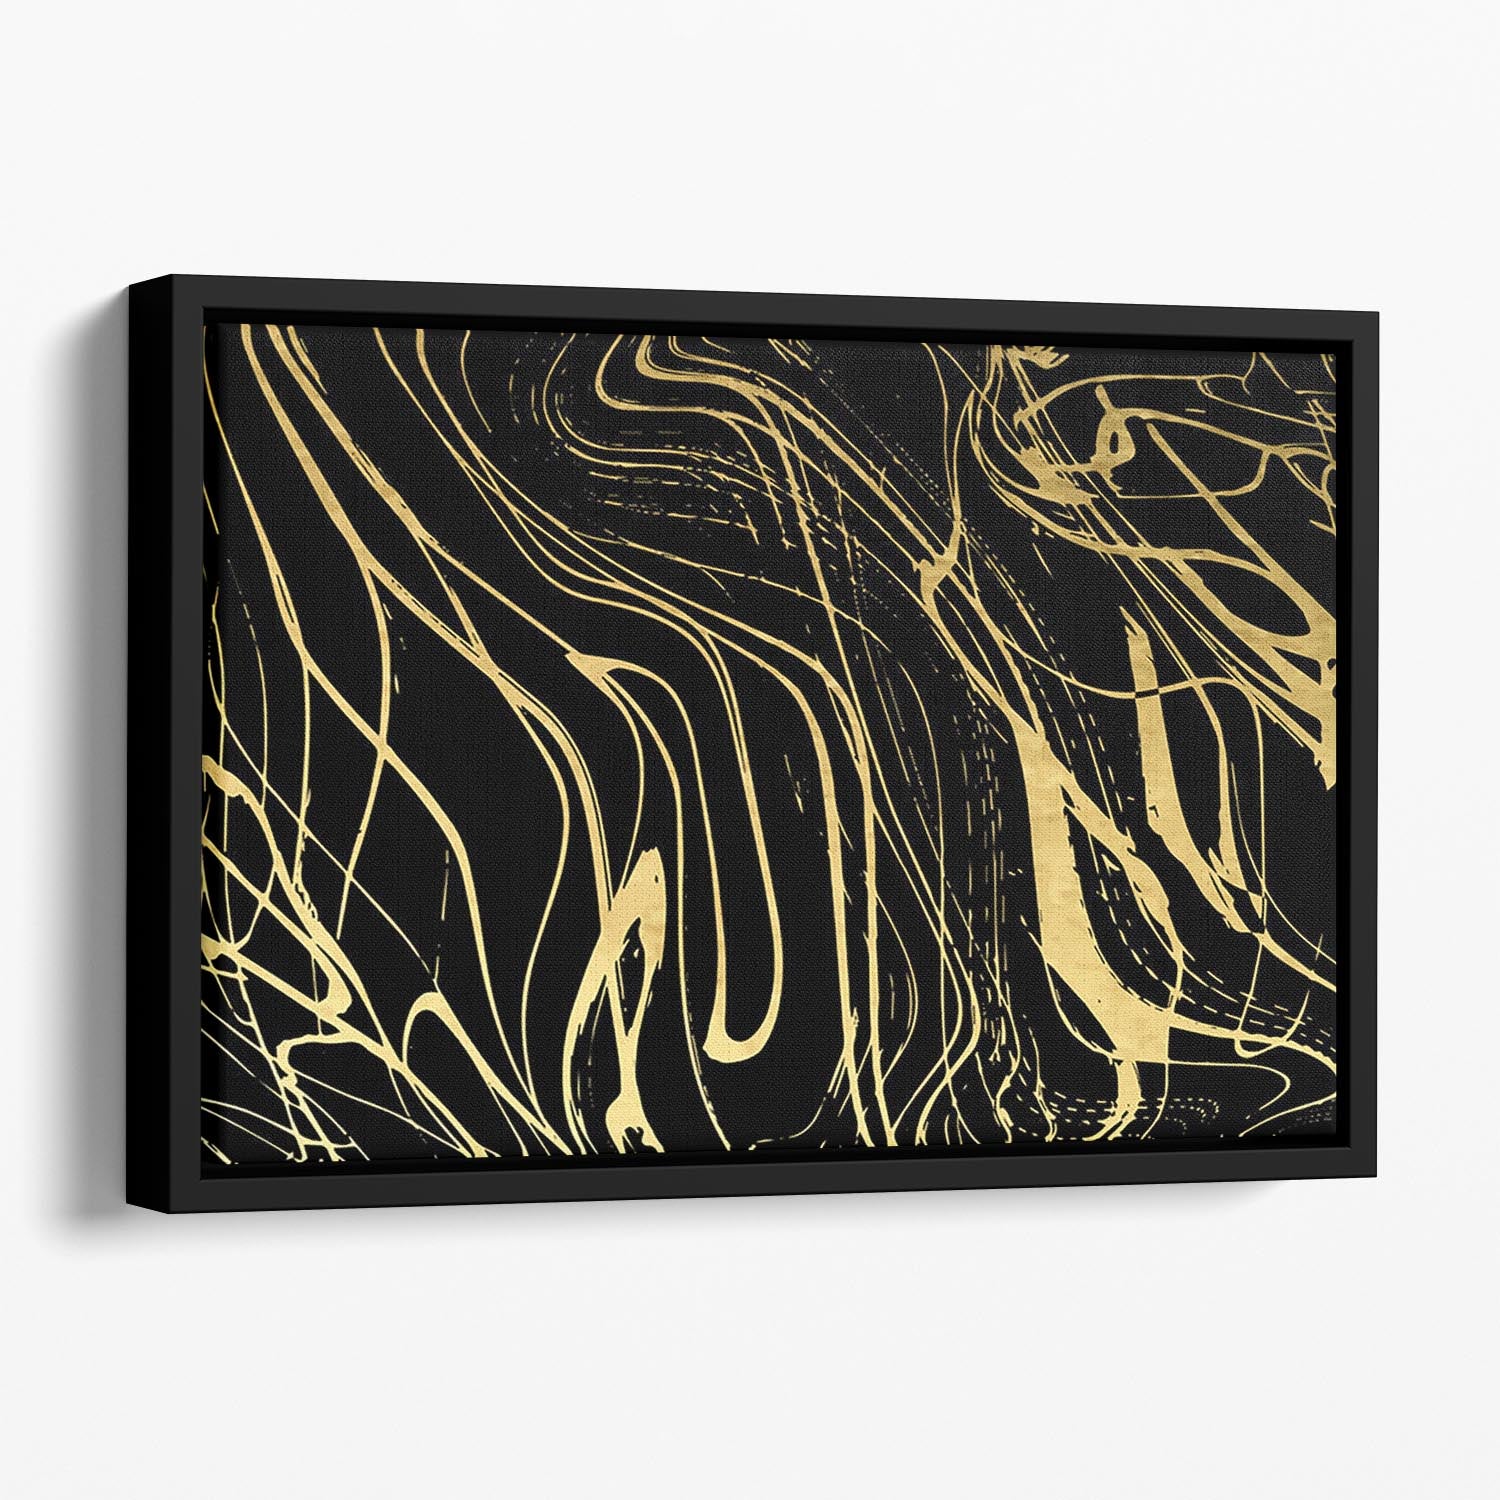 Black and Gold Swirled Abstract Floating Framed Canvas - Canvas Art Rocks - 1